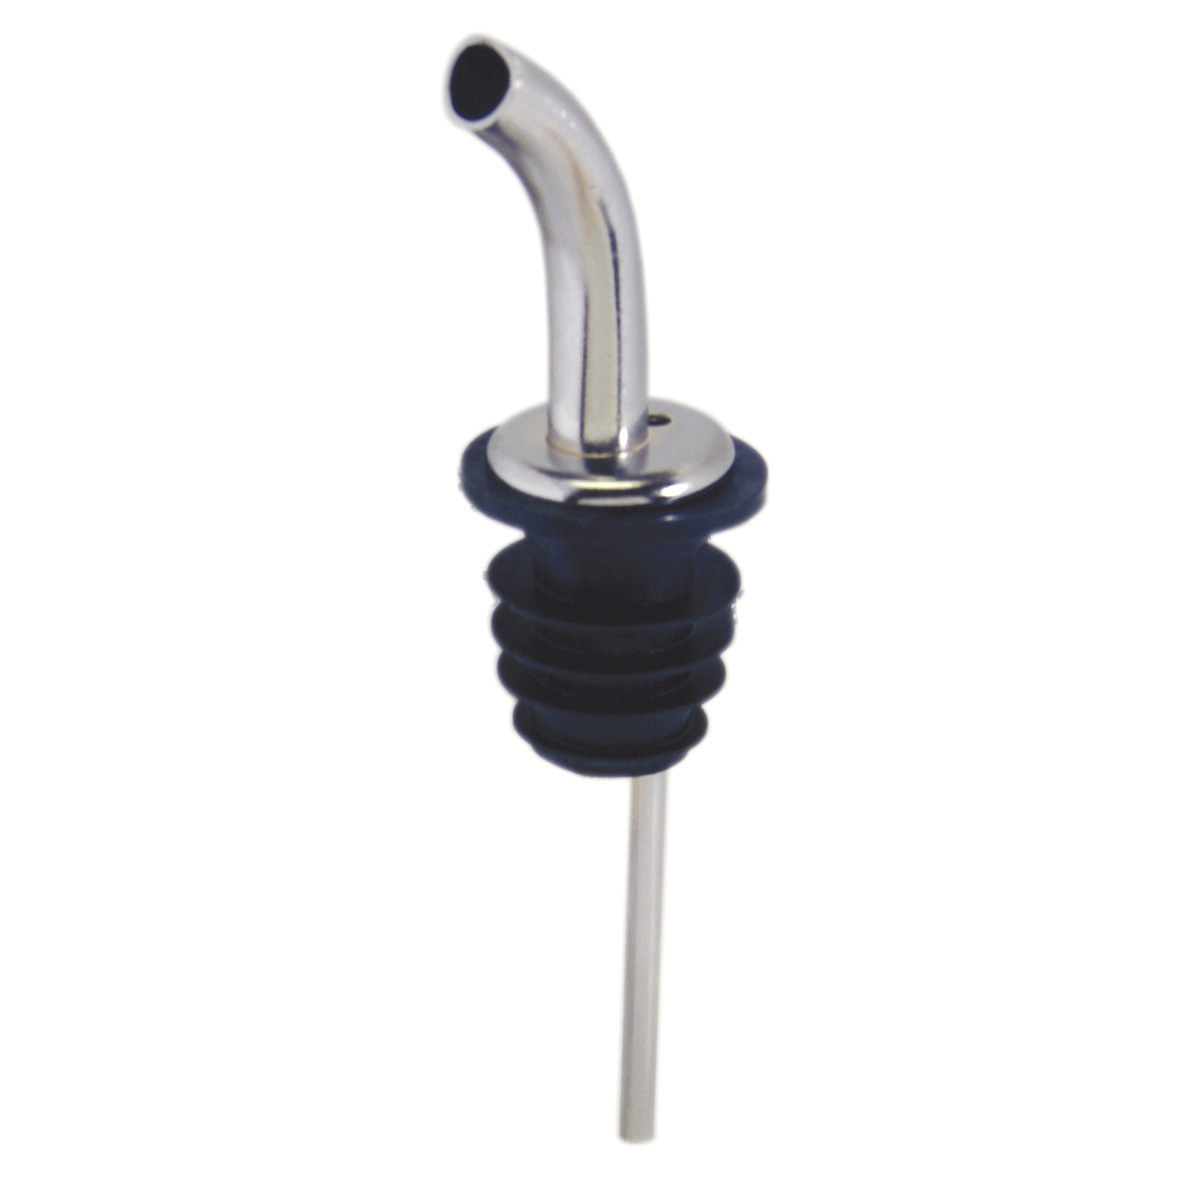 Spill-Stop 245-50 Super Jet Por, with Poly-Kork, fast pouring, gooseneck spout for extra smooth, chrome, Made in USA